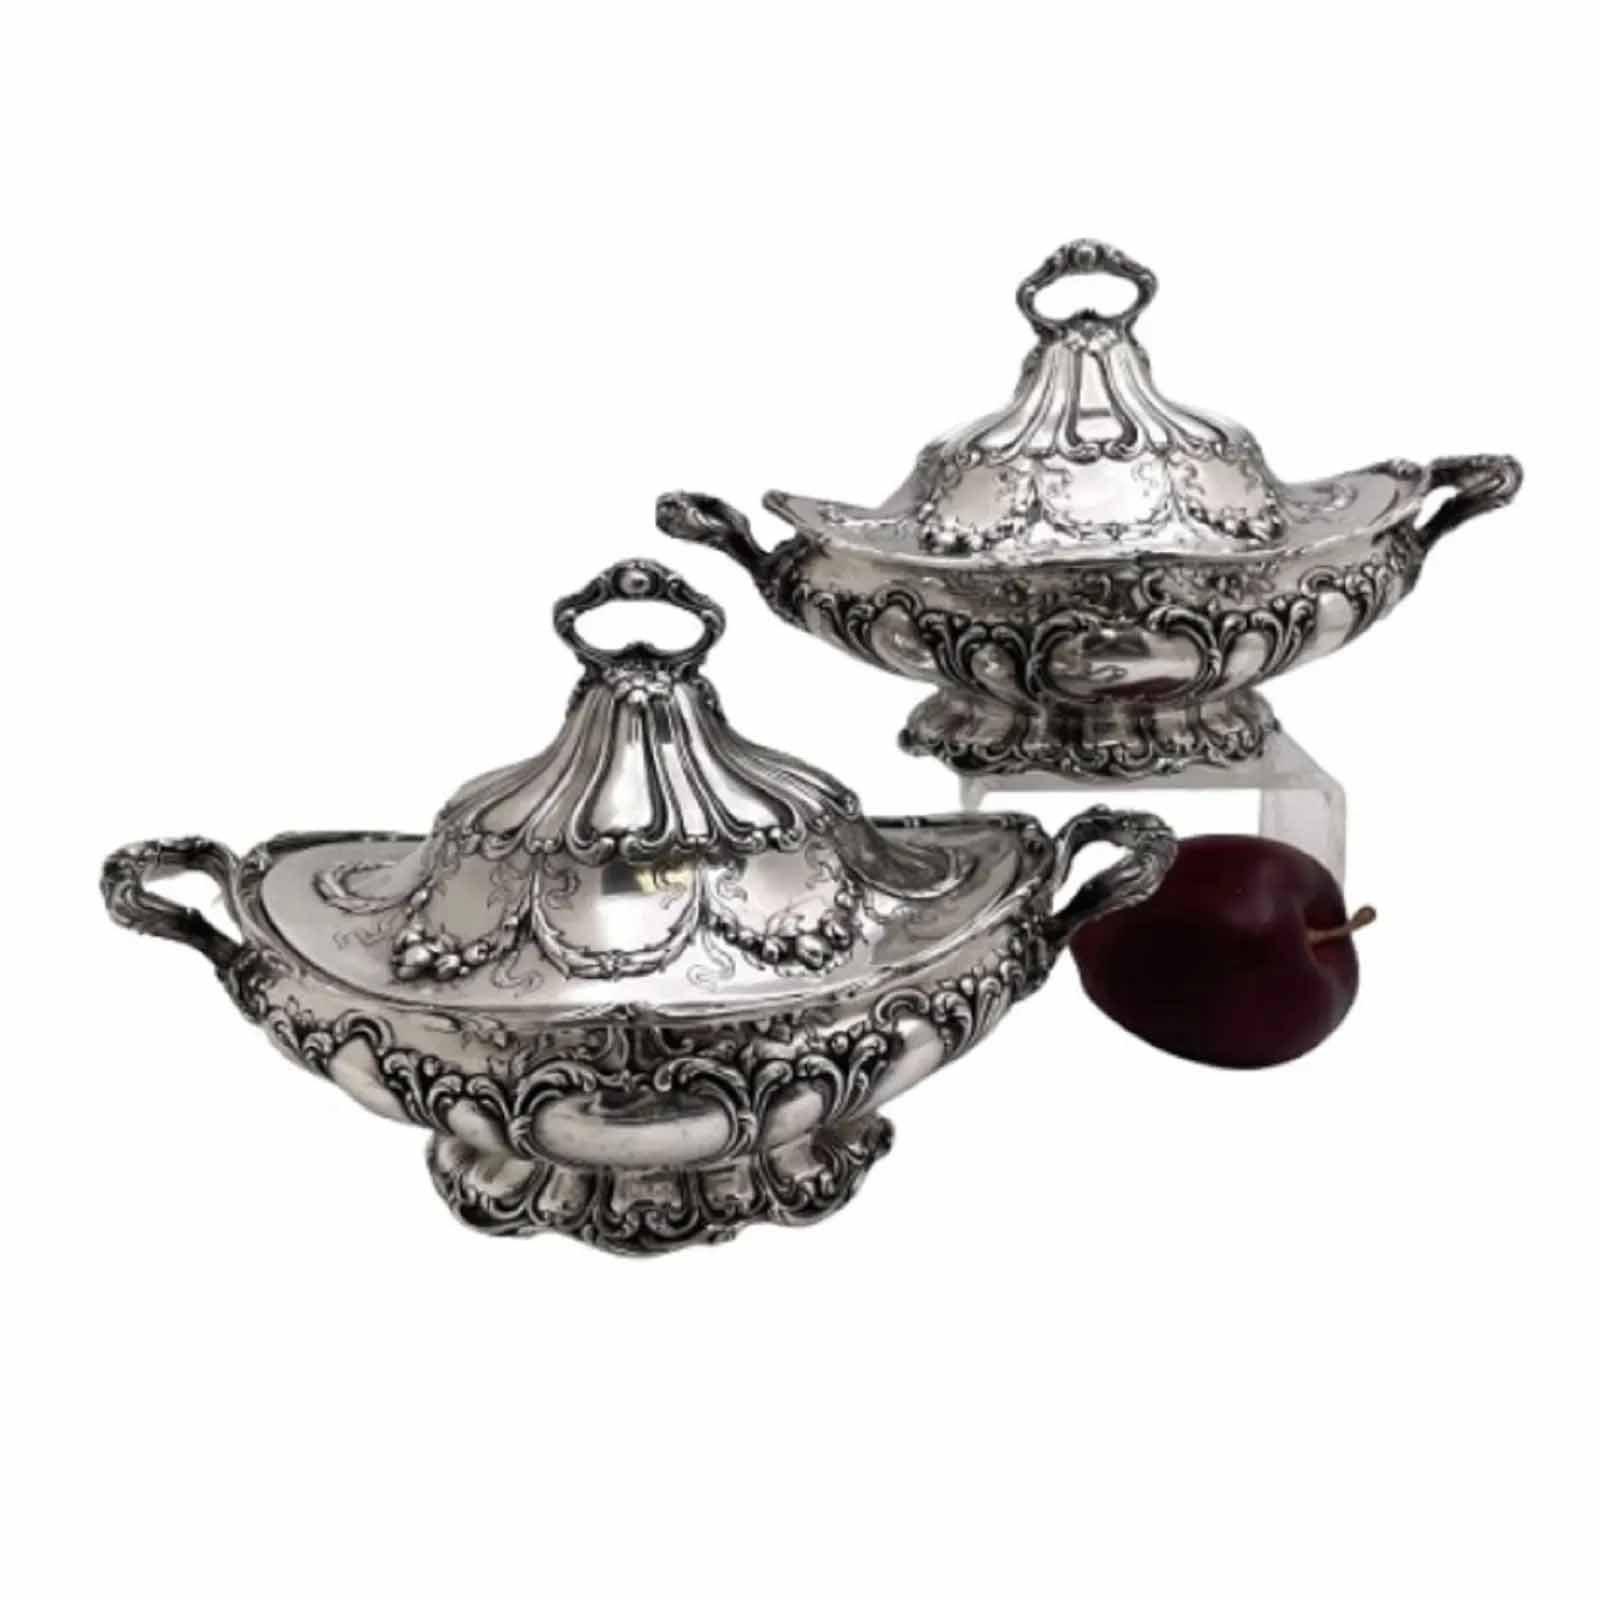 Gorham Sterling Silver Chantilly Grande Tureens, estimated at $2,900-$3,600 at SJ Auctioneers.